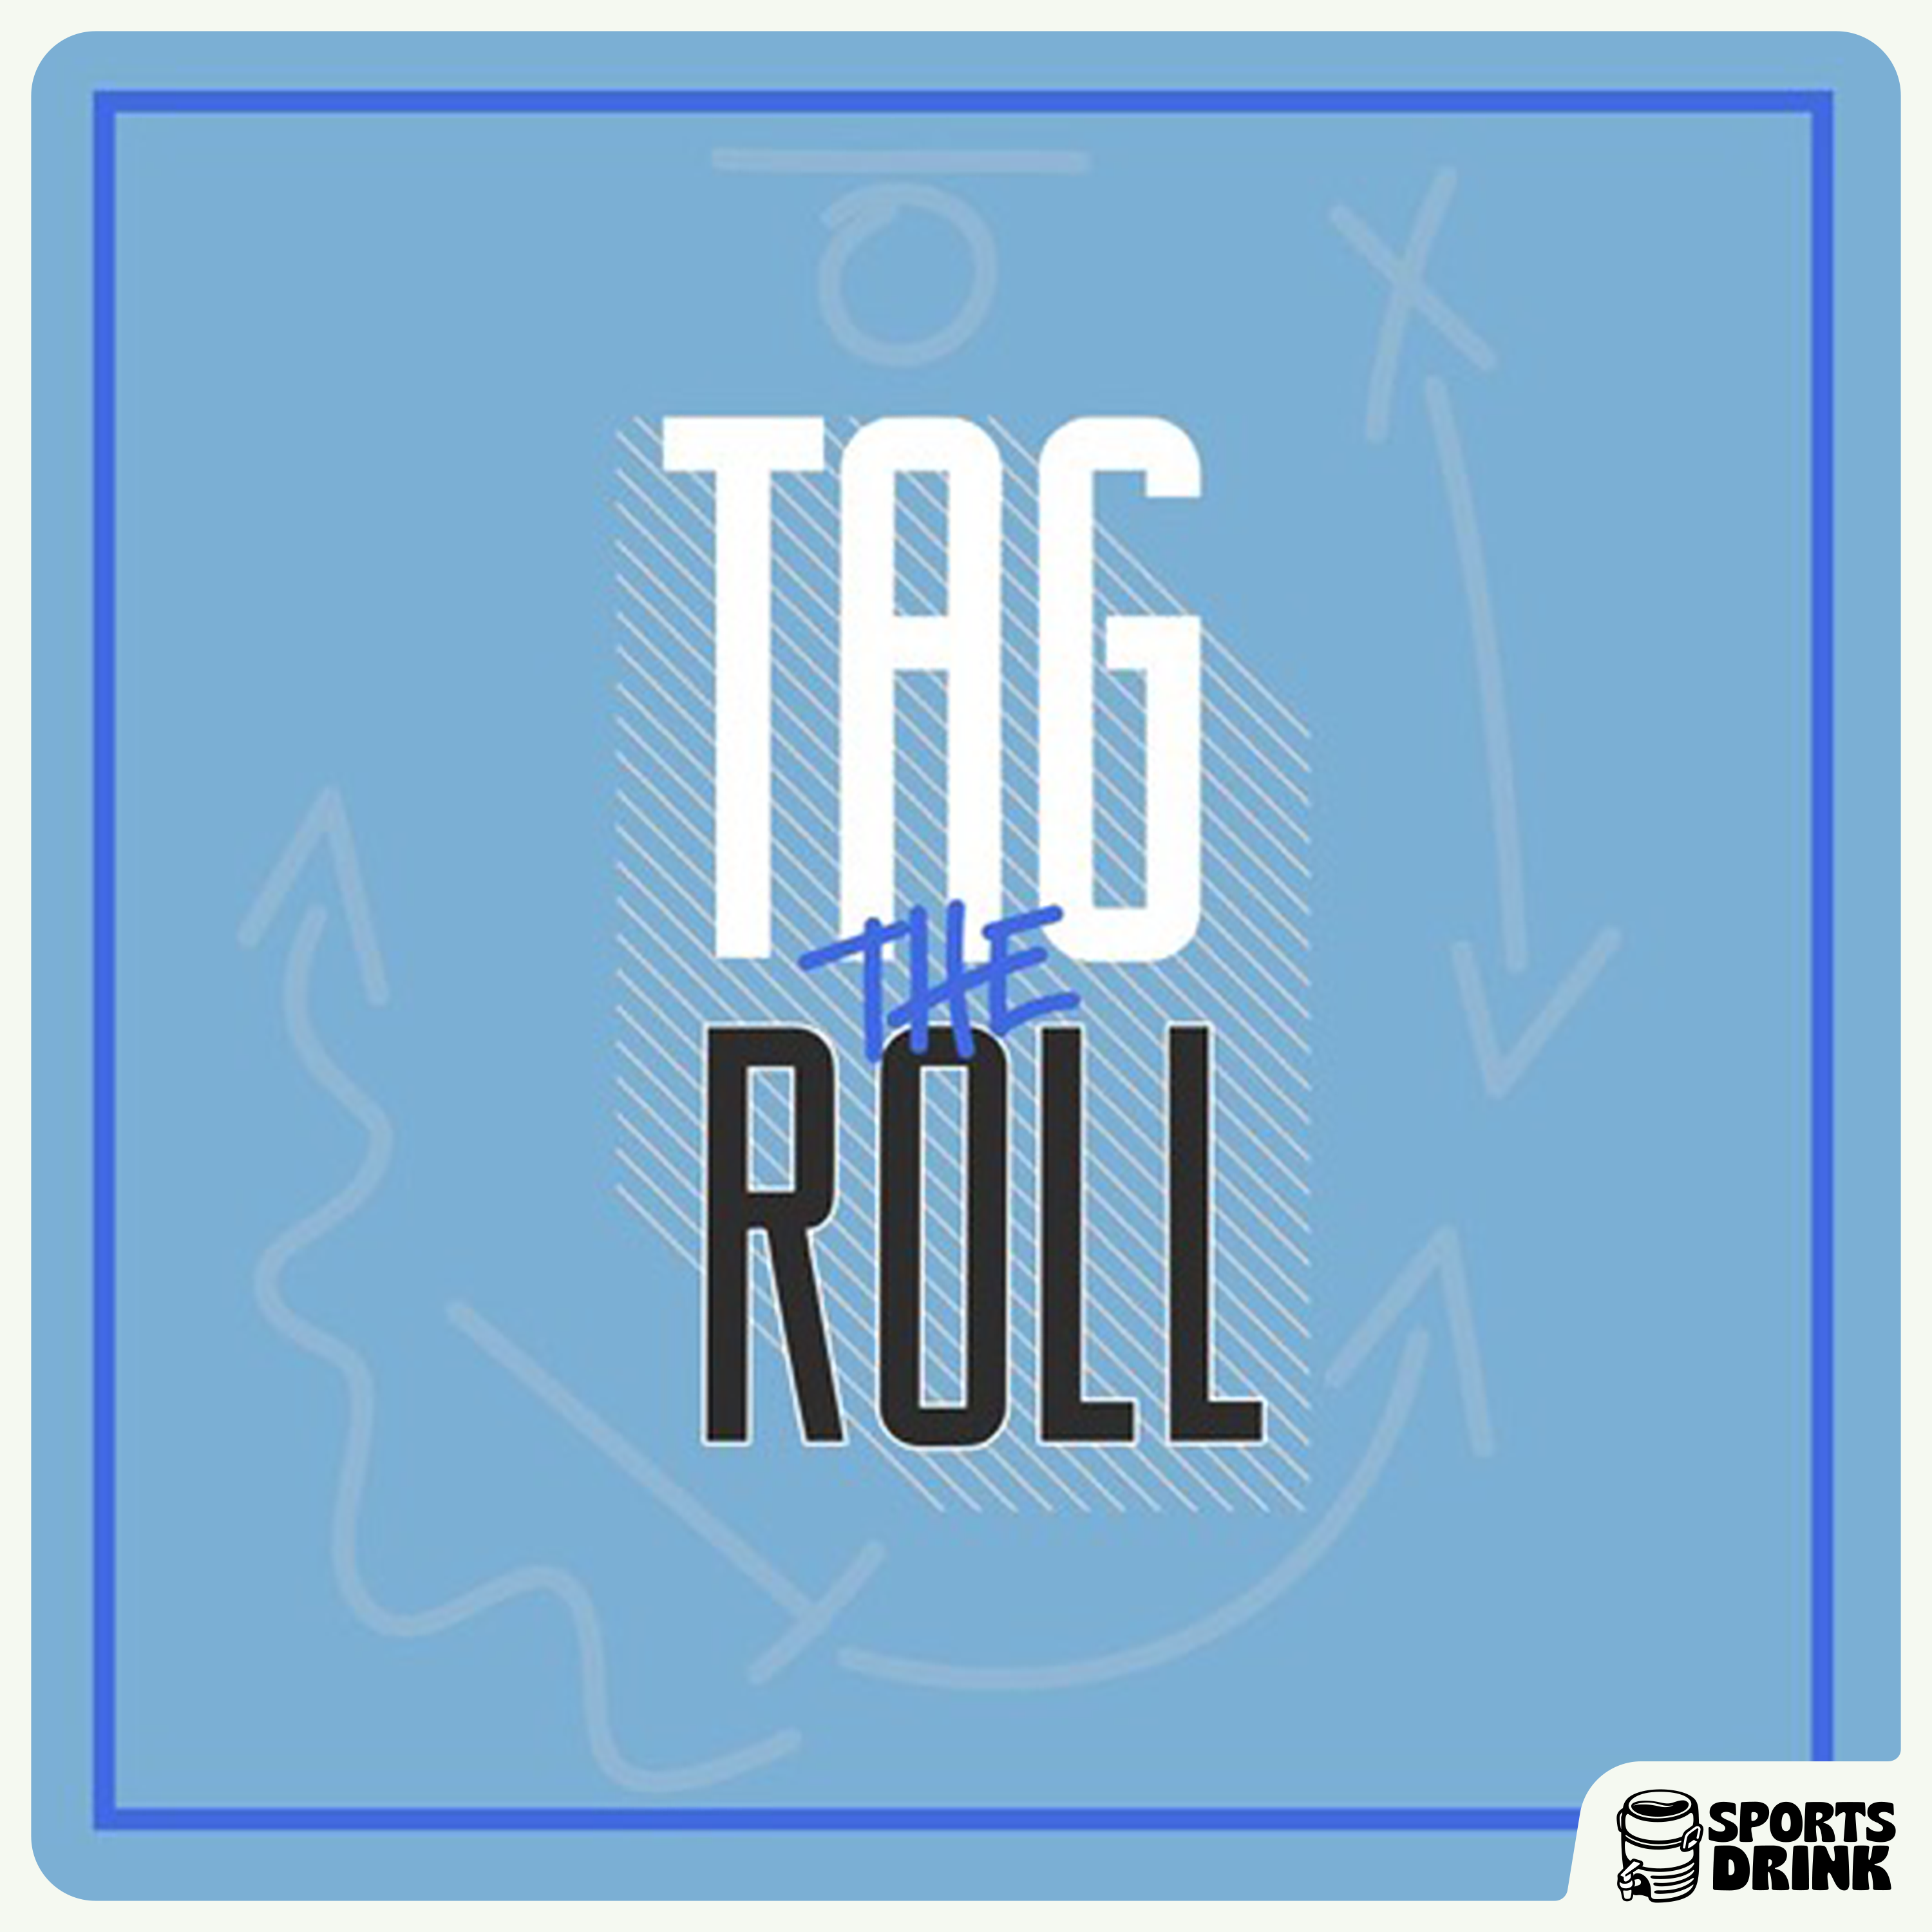 Tag The Roll